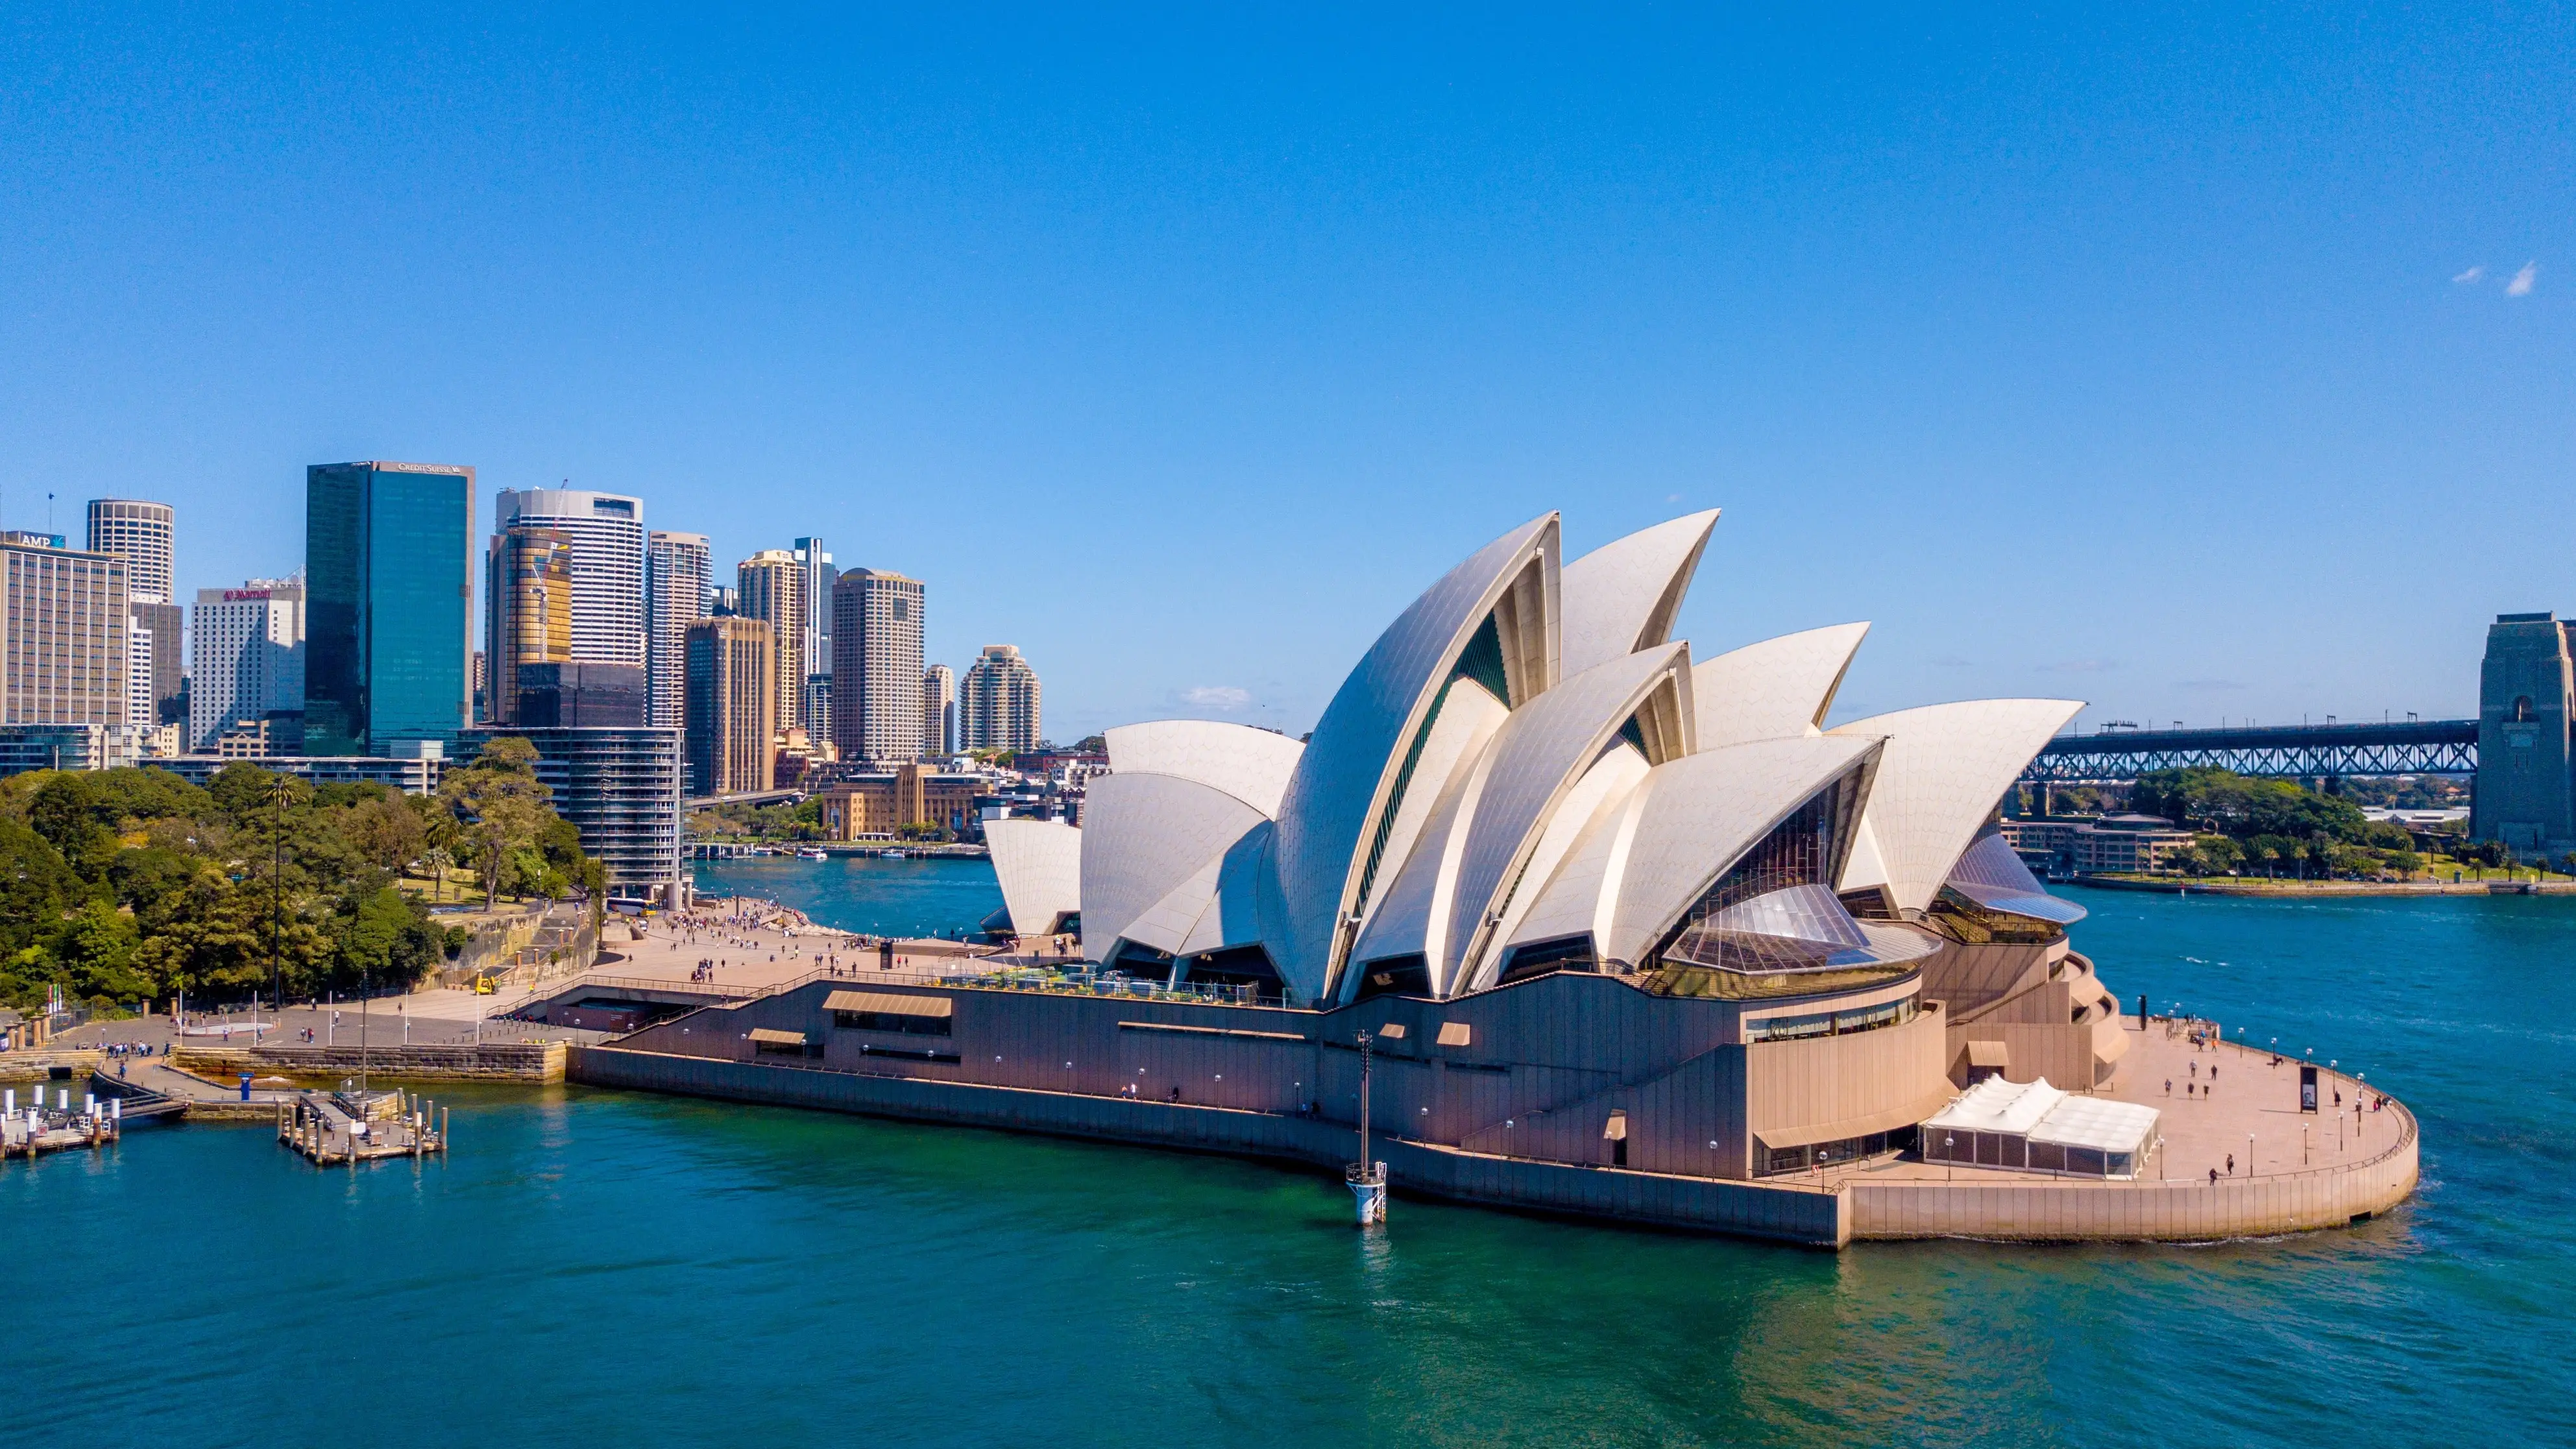 Sydney Opera House surrounded by the harbour on a sunny day. Image credit: stock.adobe.com/ingusk